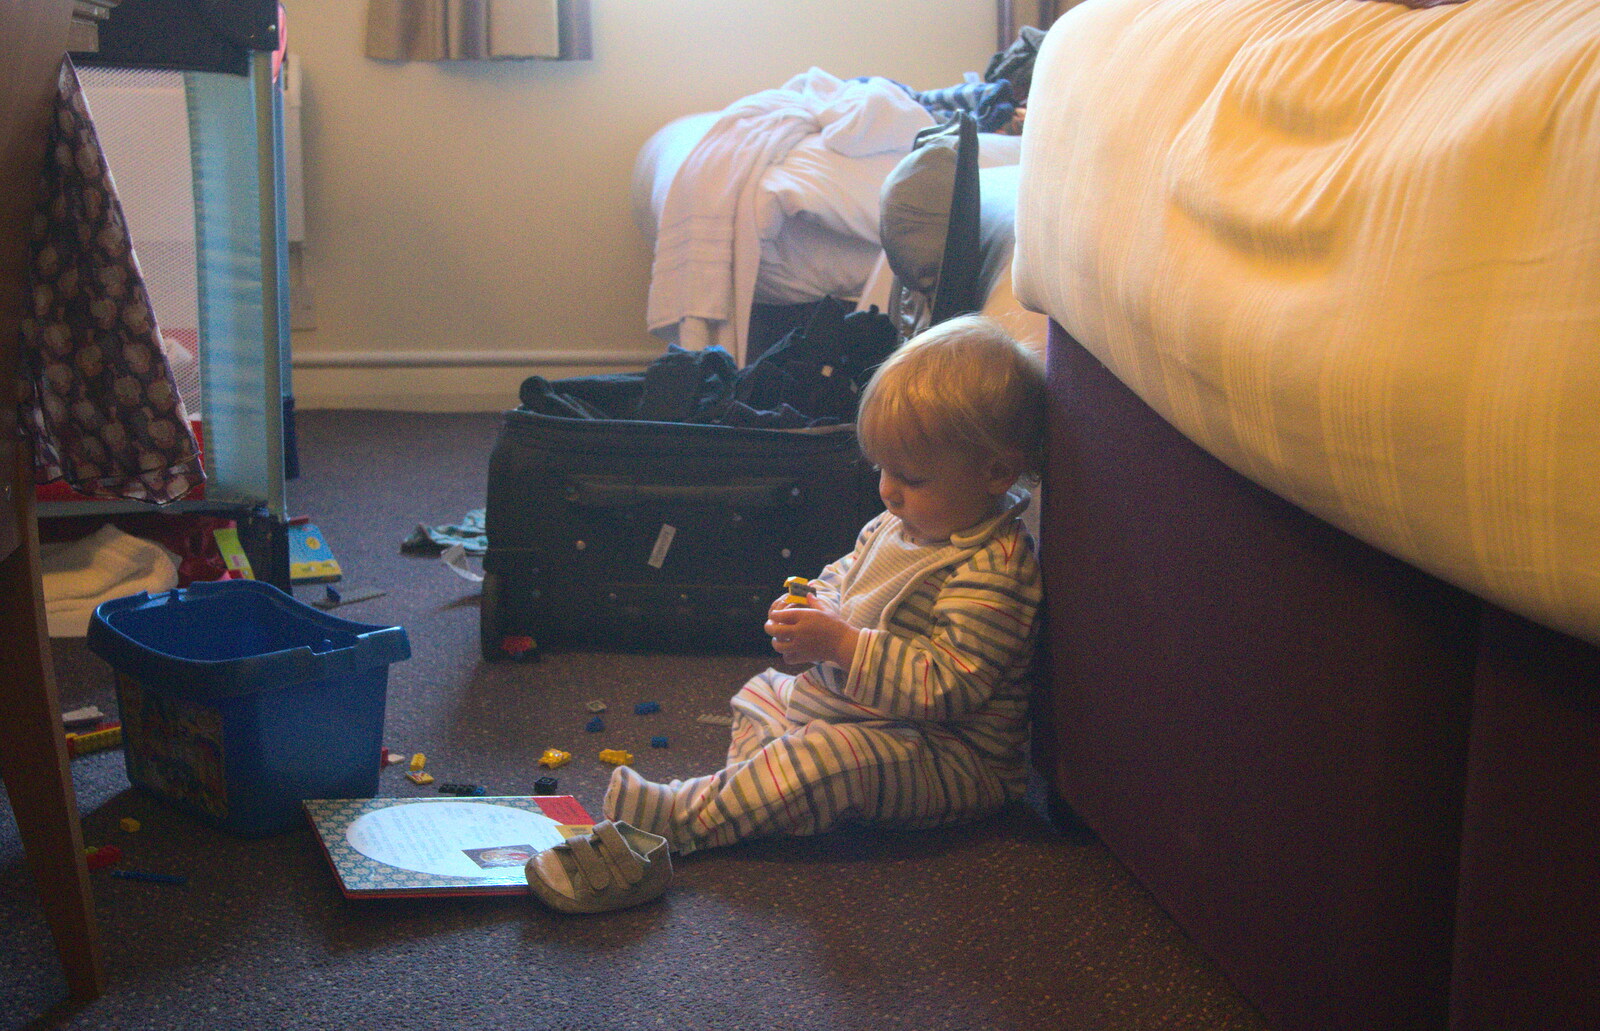 Harry plays with Lego in the hotel room from Chesterfield and the Twisty Spire, Derbyshire - 19th April 2013